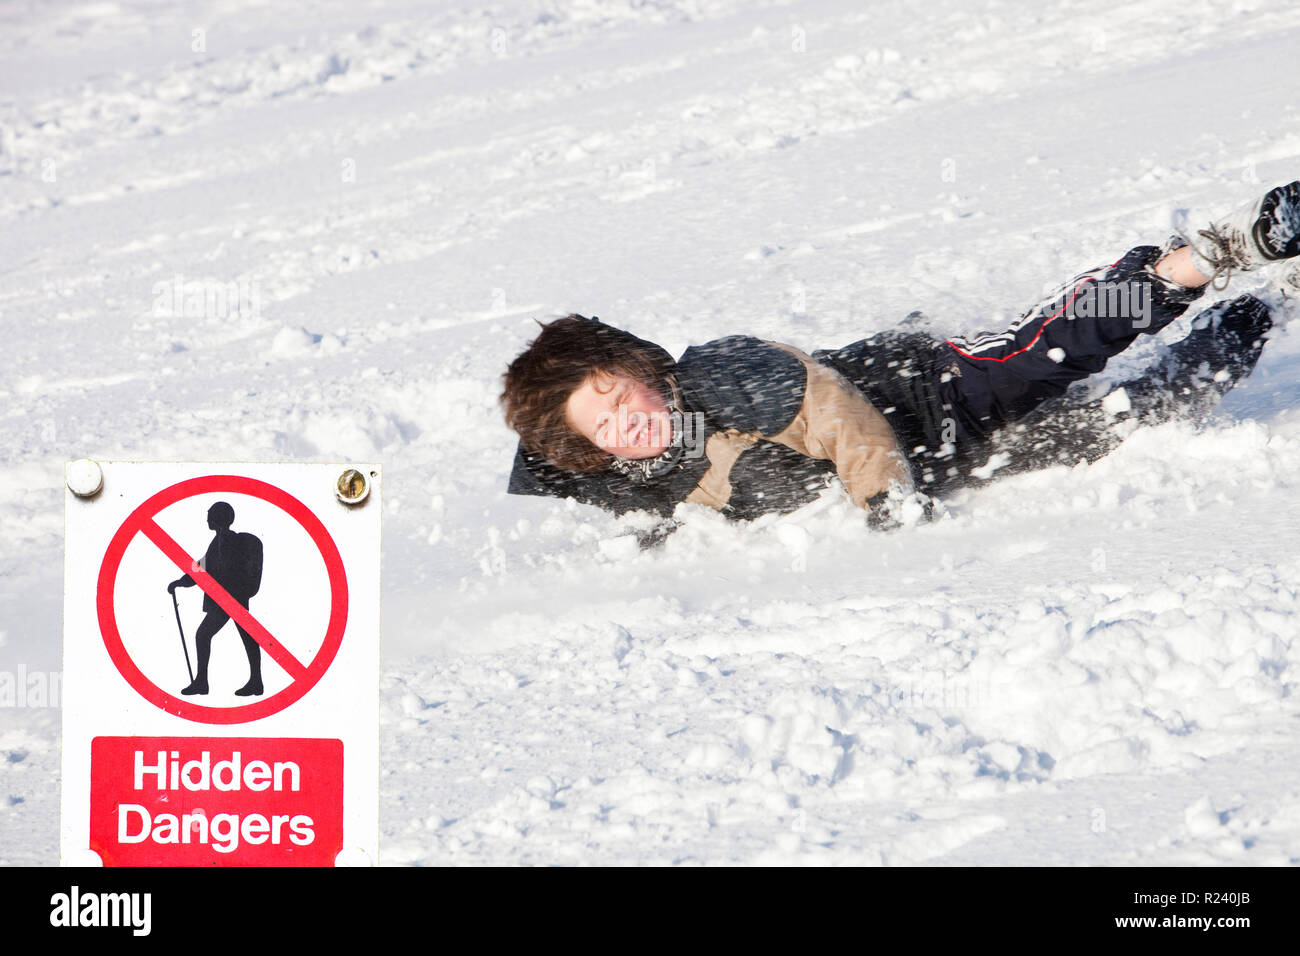 A young boy falling over in the snow, UK. Stock Photo